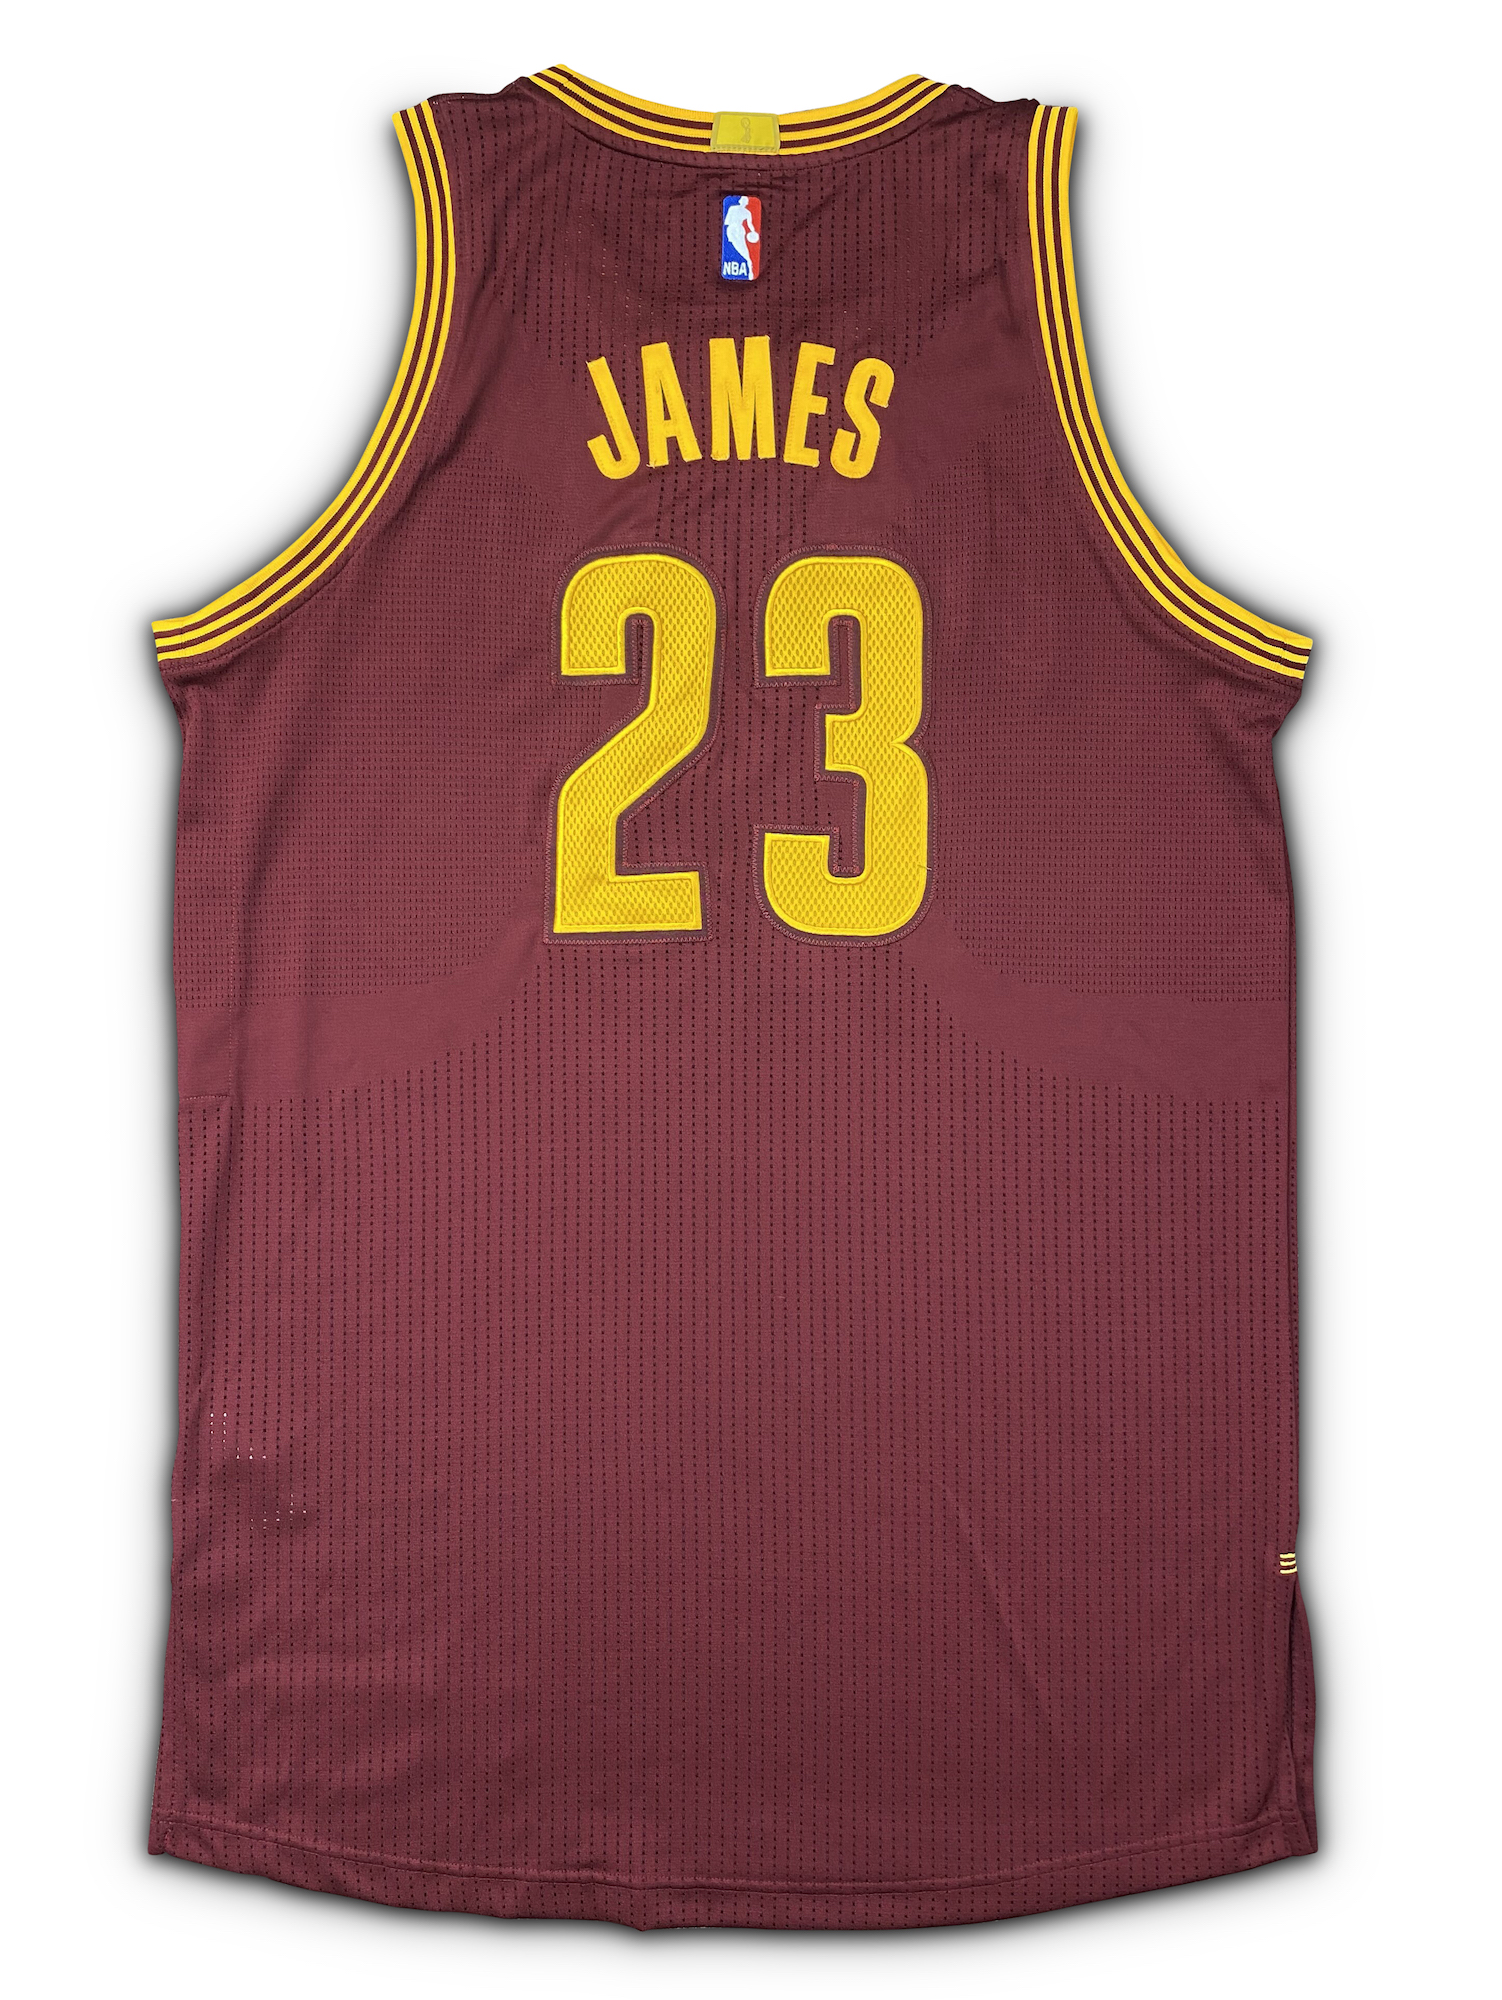 LeBron James - Cleveland Cavaliers - White Playoffs Game-Worn Jersey -  200th Career Playoff Game - 2016-17 Season